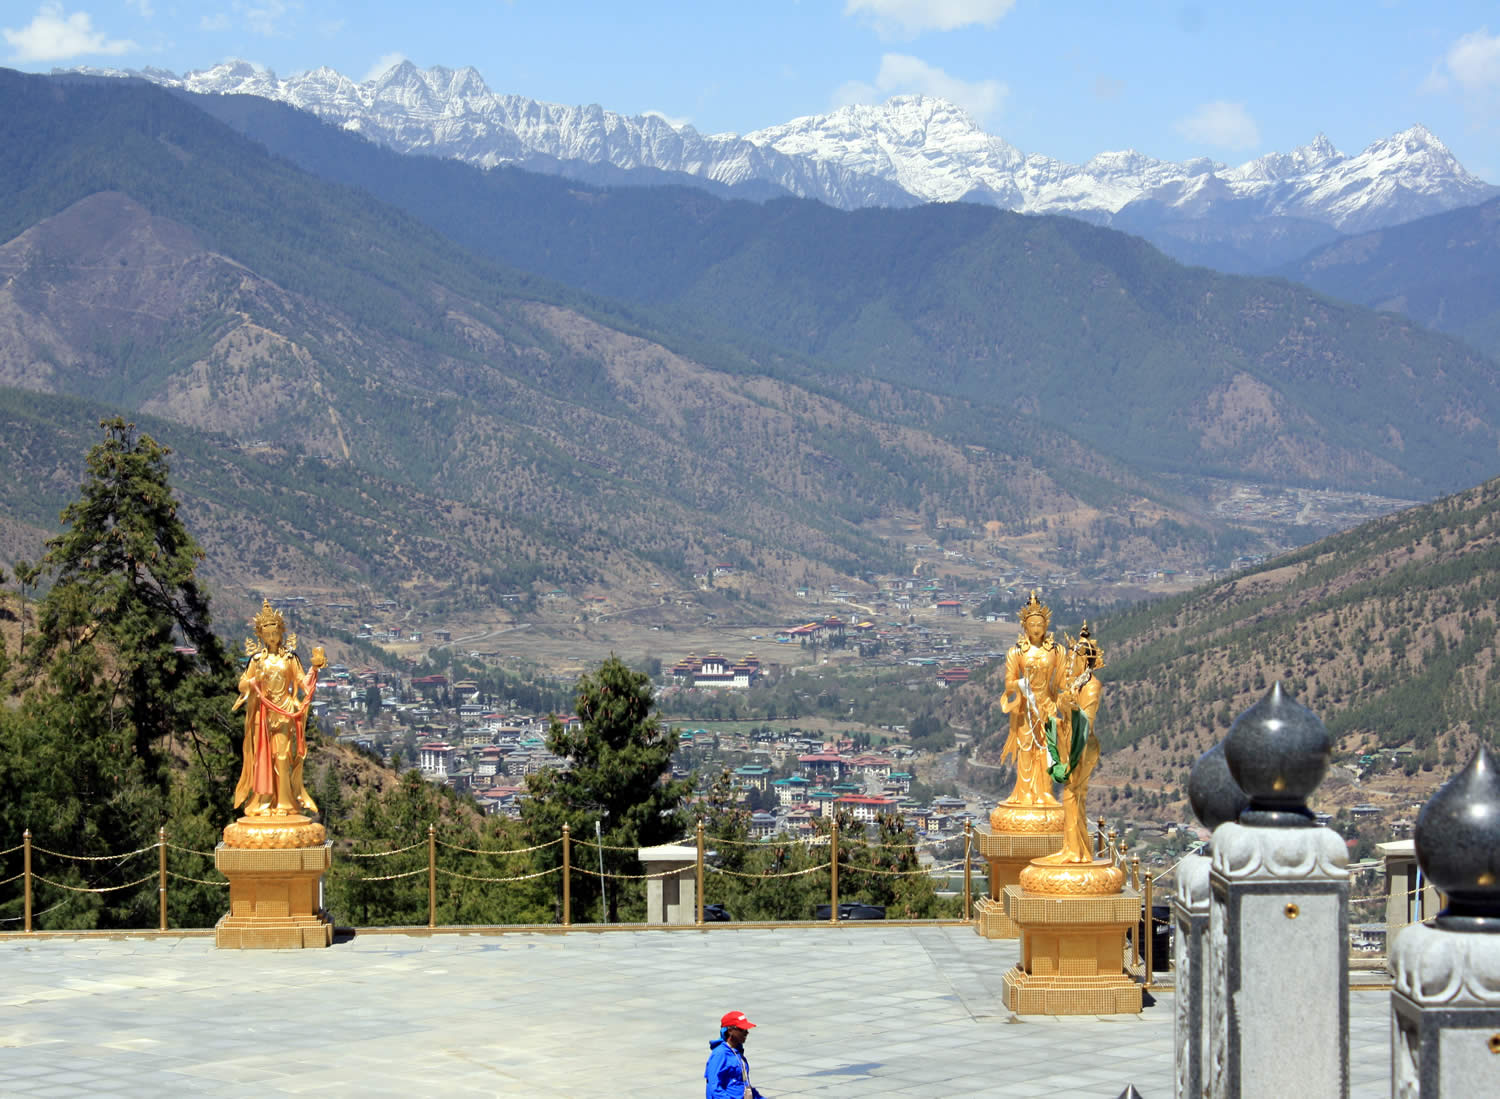 A breath-taking view of the Himalayas rising above the city of Thimphu with several of the offering goddesses in the foreground  as seen from Kunsel Phodrang.